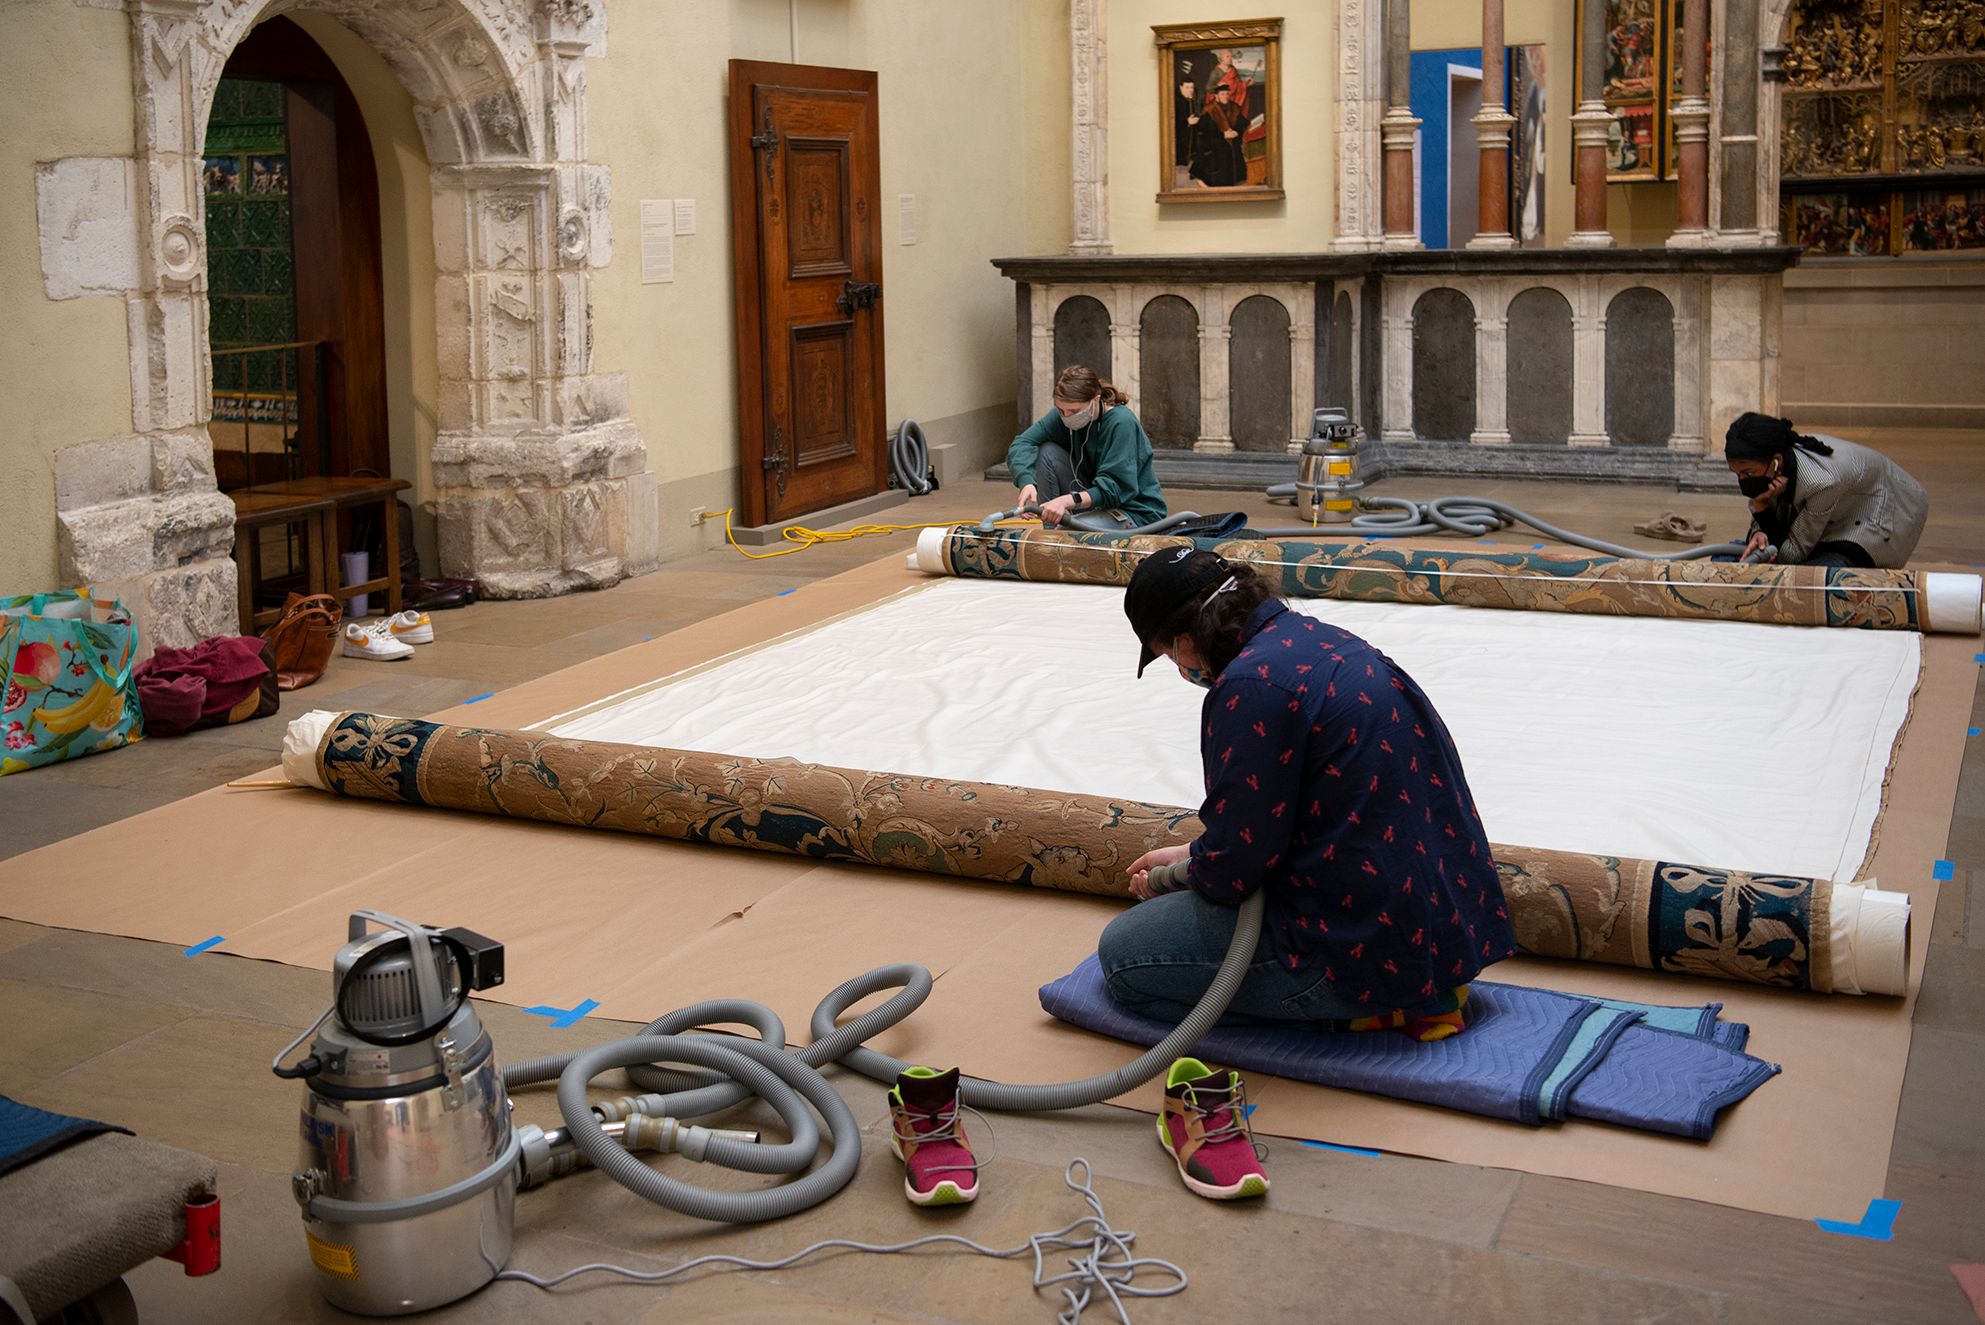 Three conservators cleaning and handling a large carpet in the European Art galleries